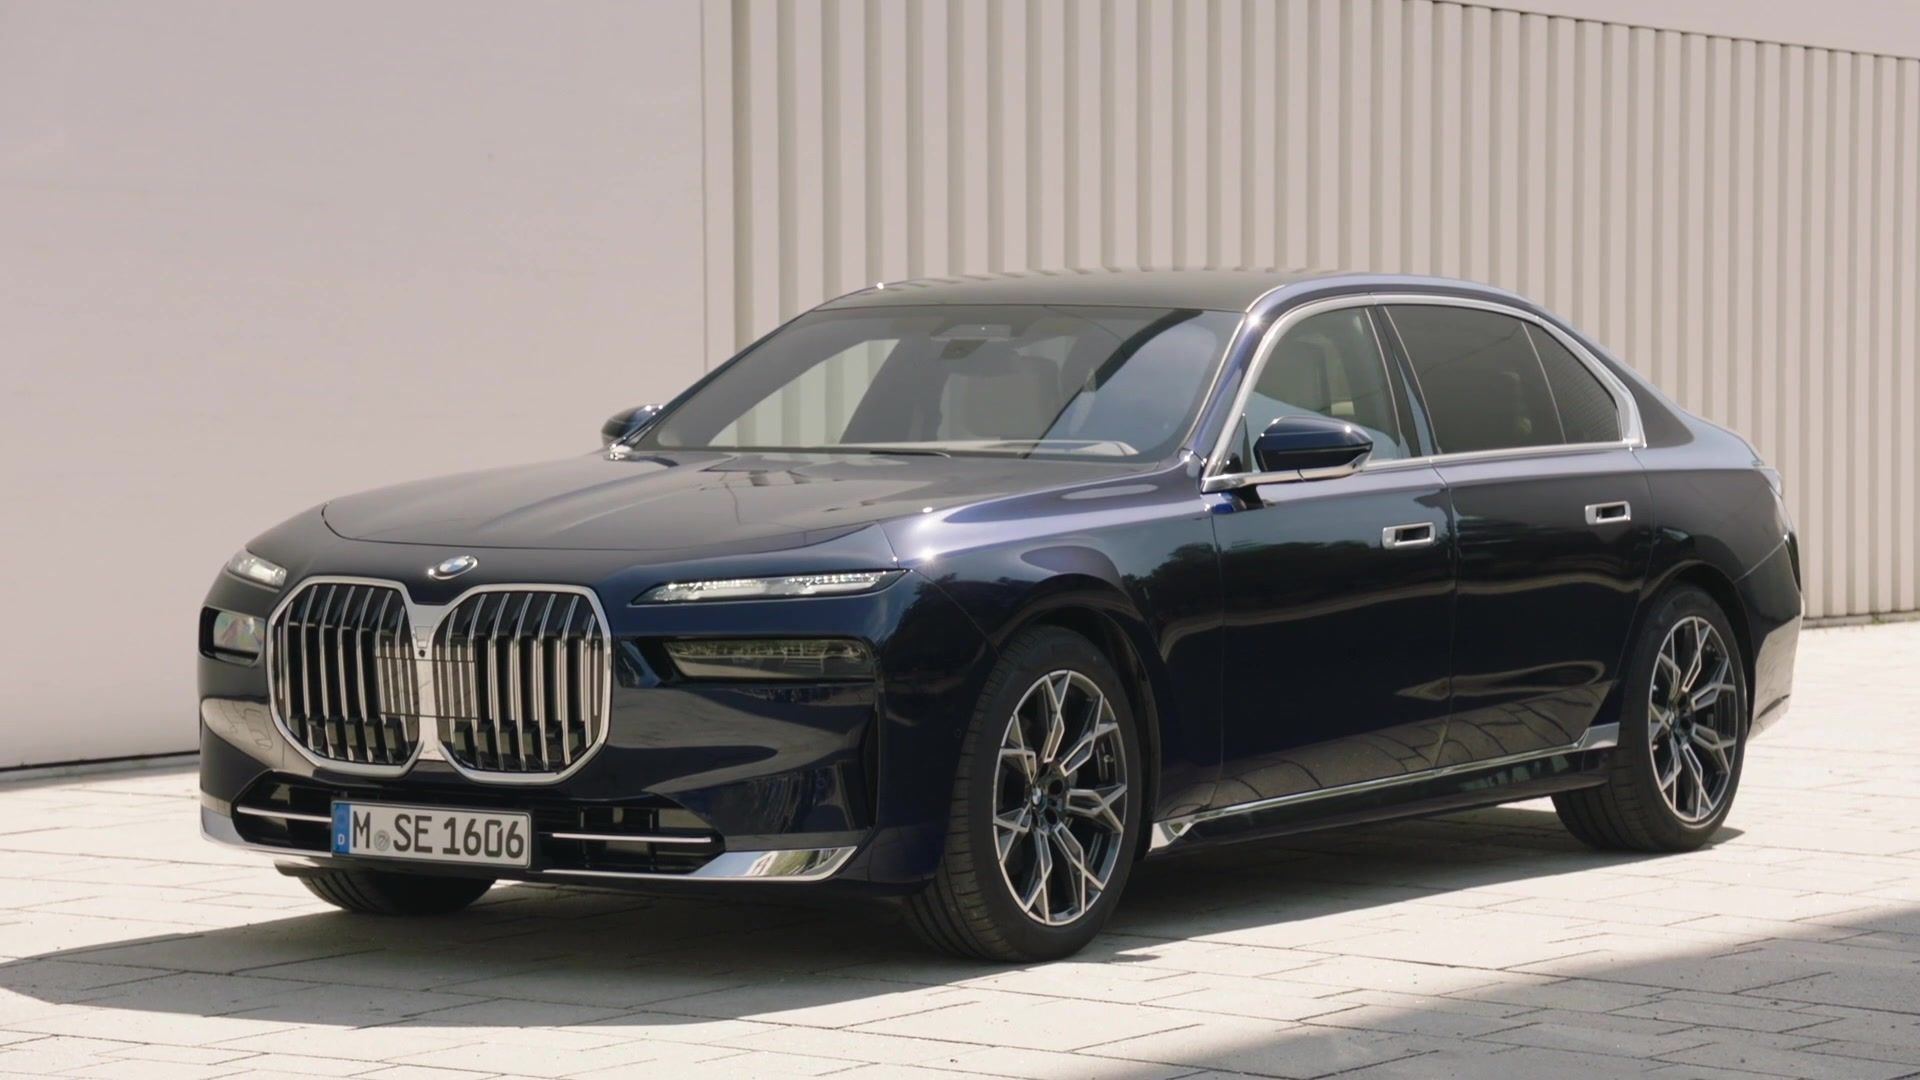 The BMW 7 Series - Inline six-cylinder diesel engine with state-of-the-art 48-volt mild hybrid technology